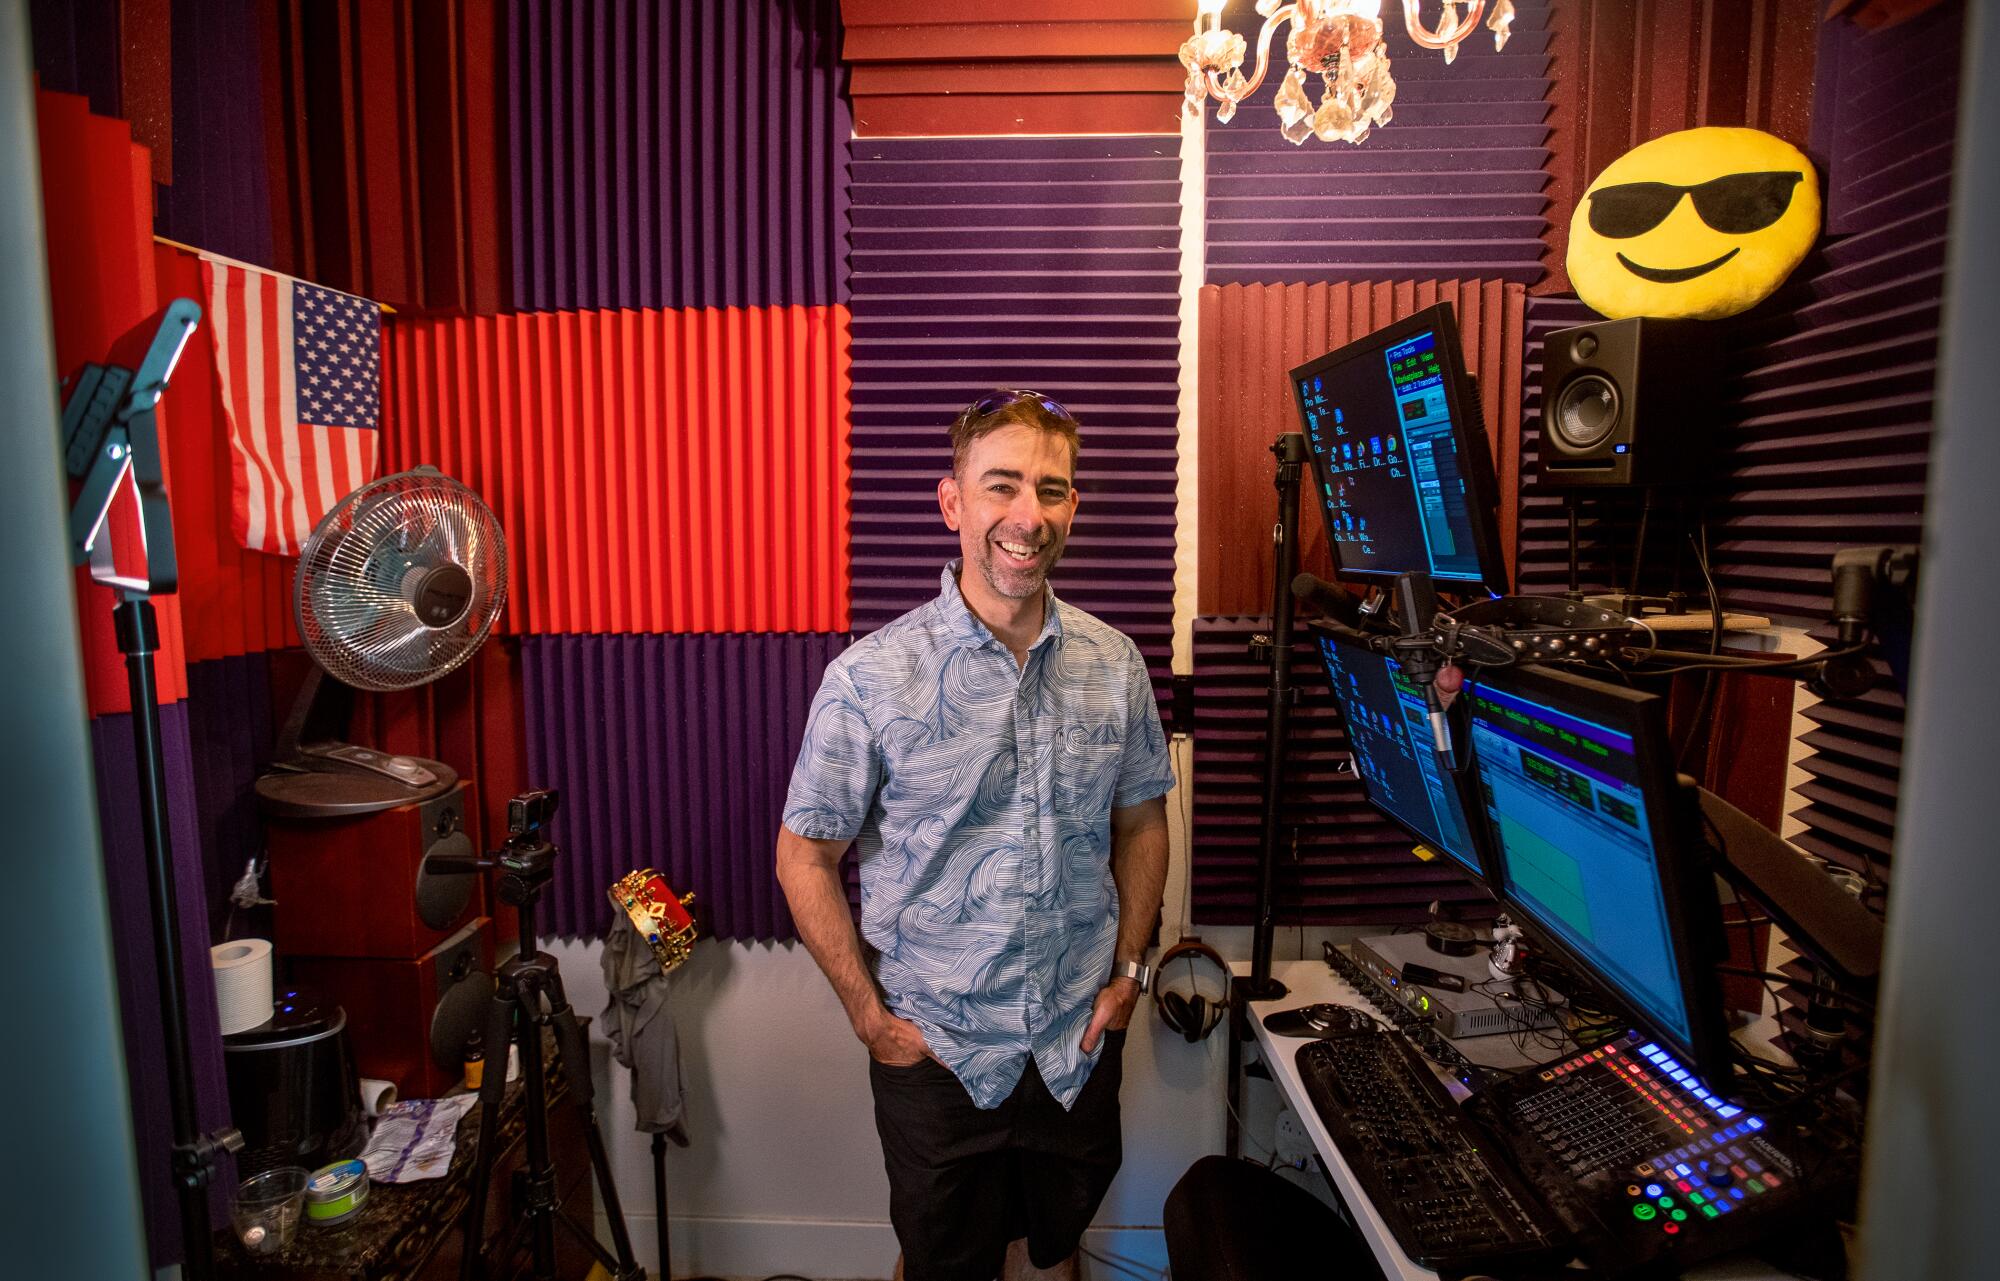 A man stands in a room with purple and red foam acoustic panels with computer screens and sound equipment around him.